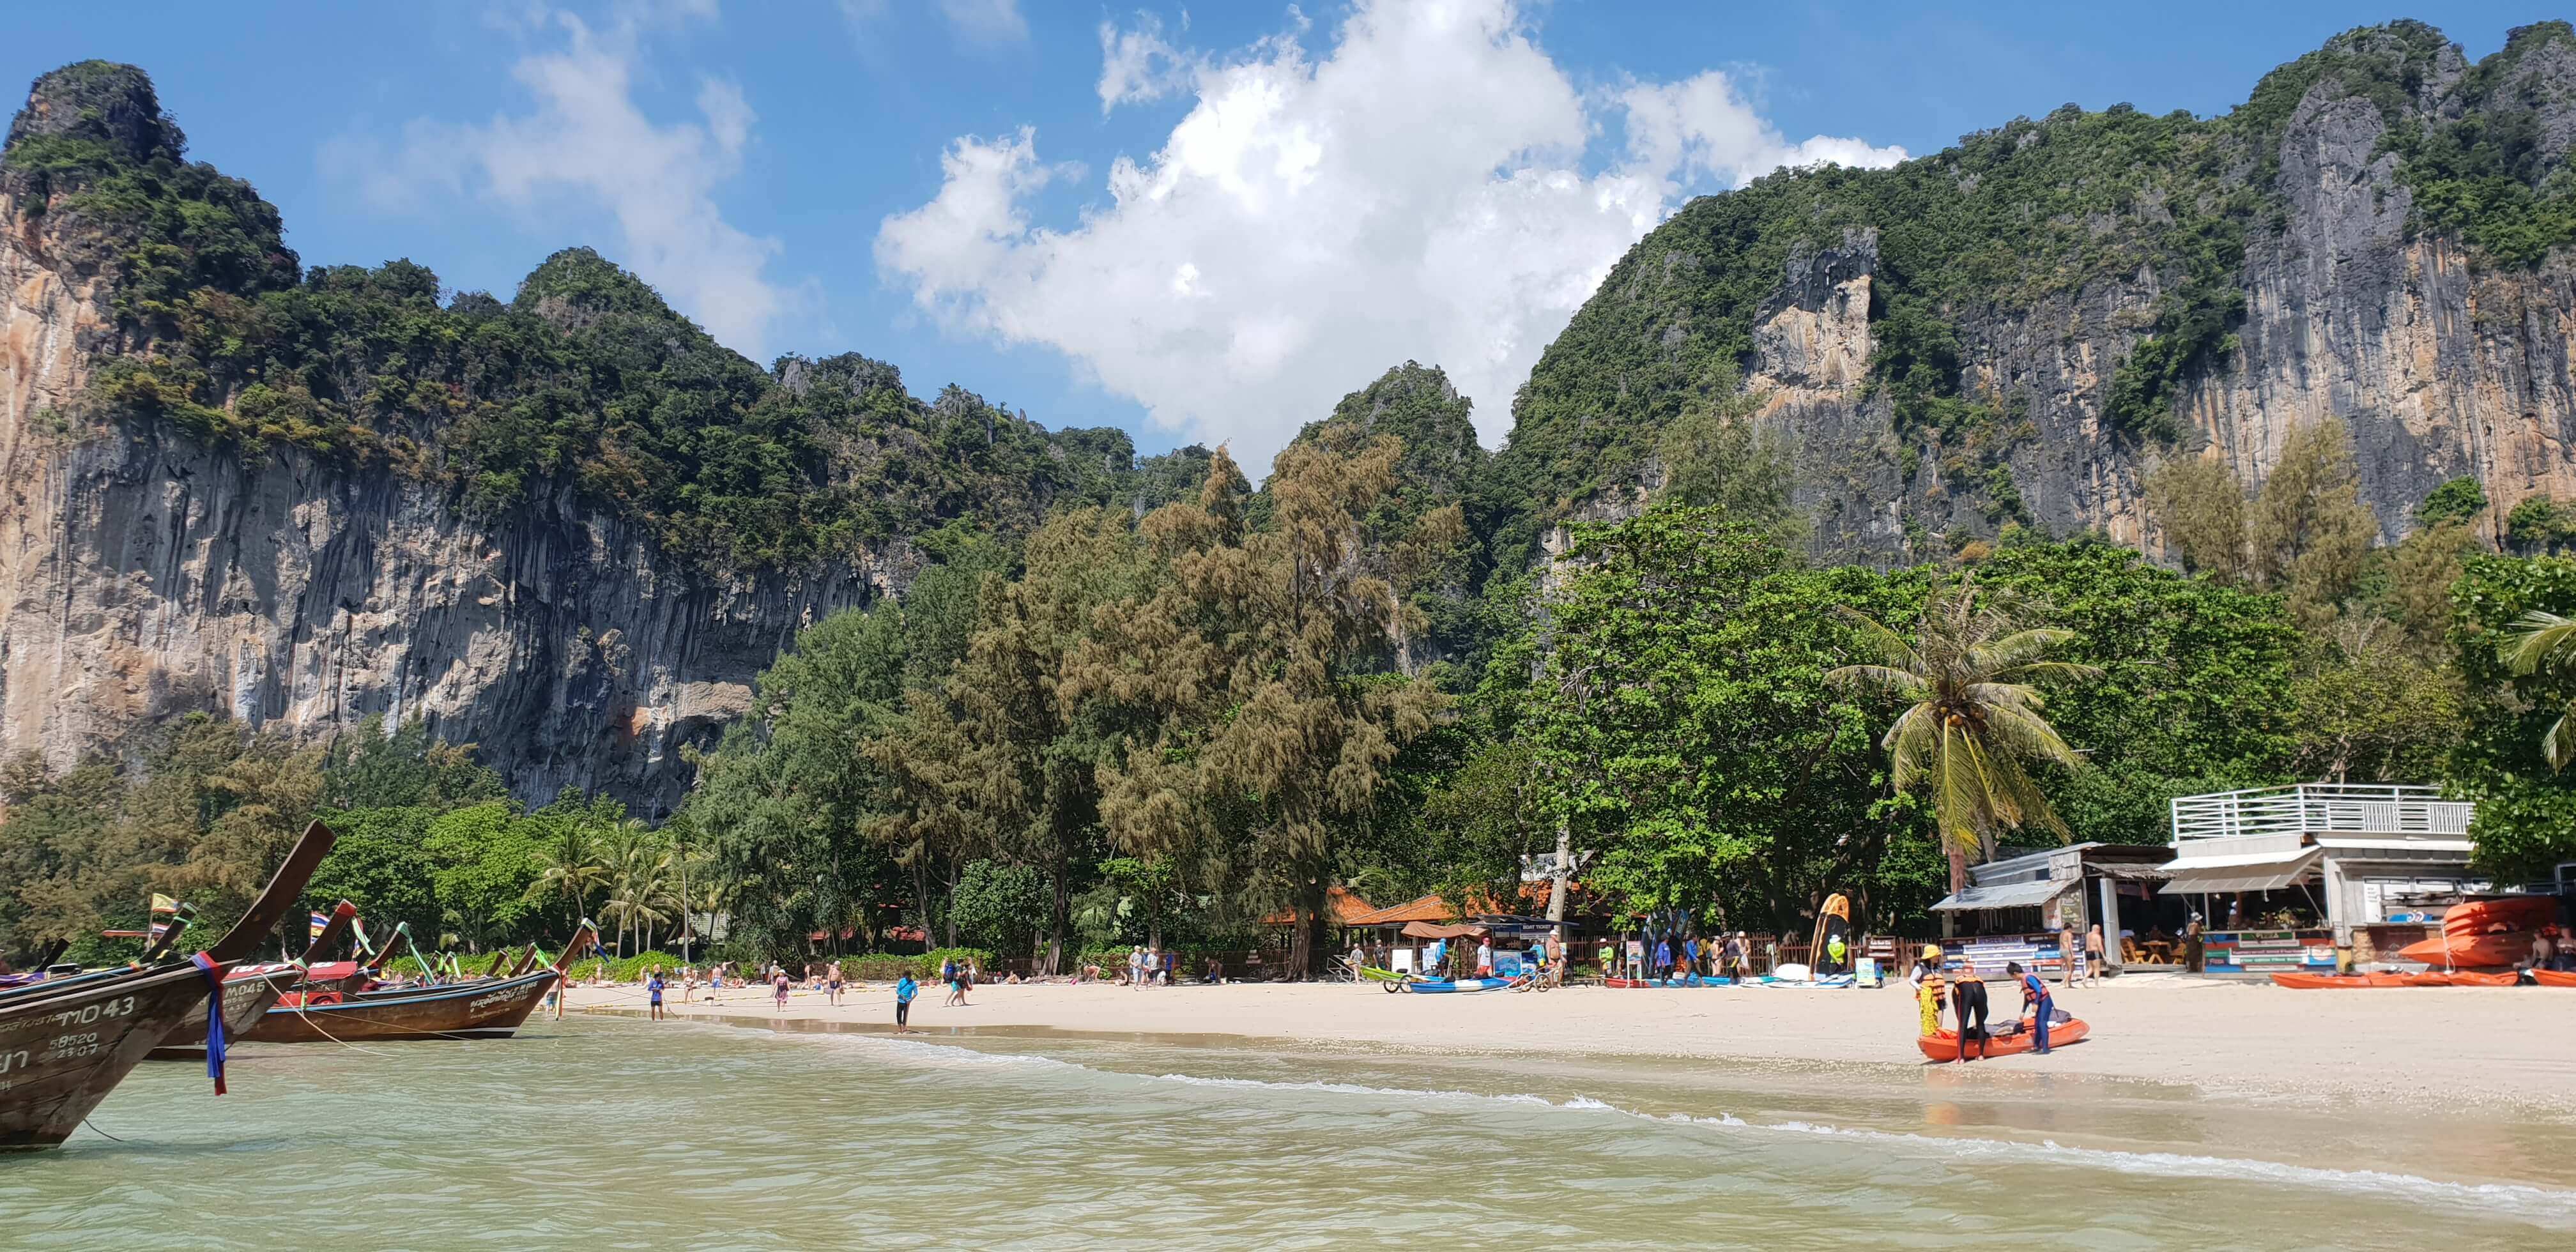 Departure point for the Krabi sunset cruise at the Railay beach